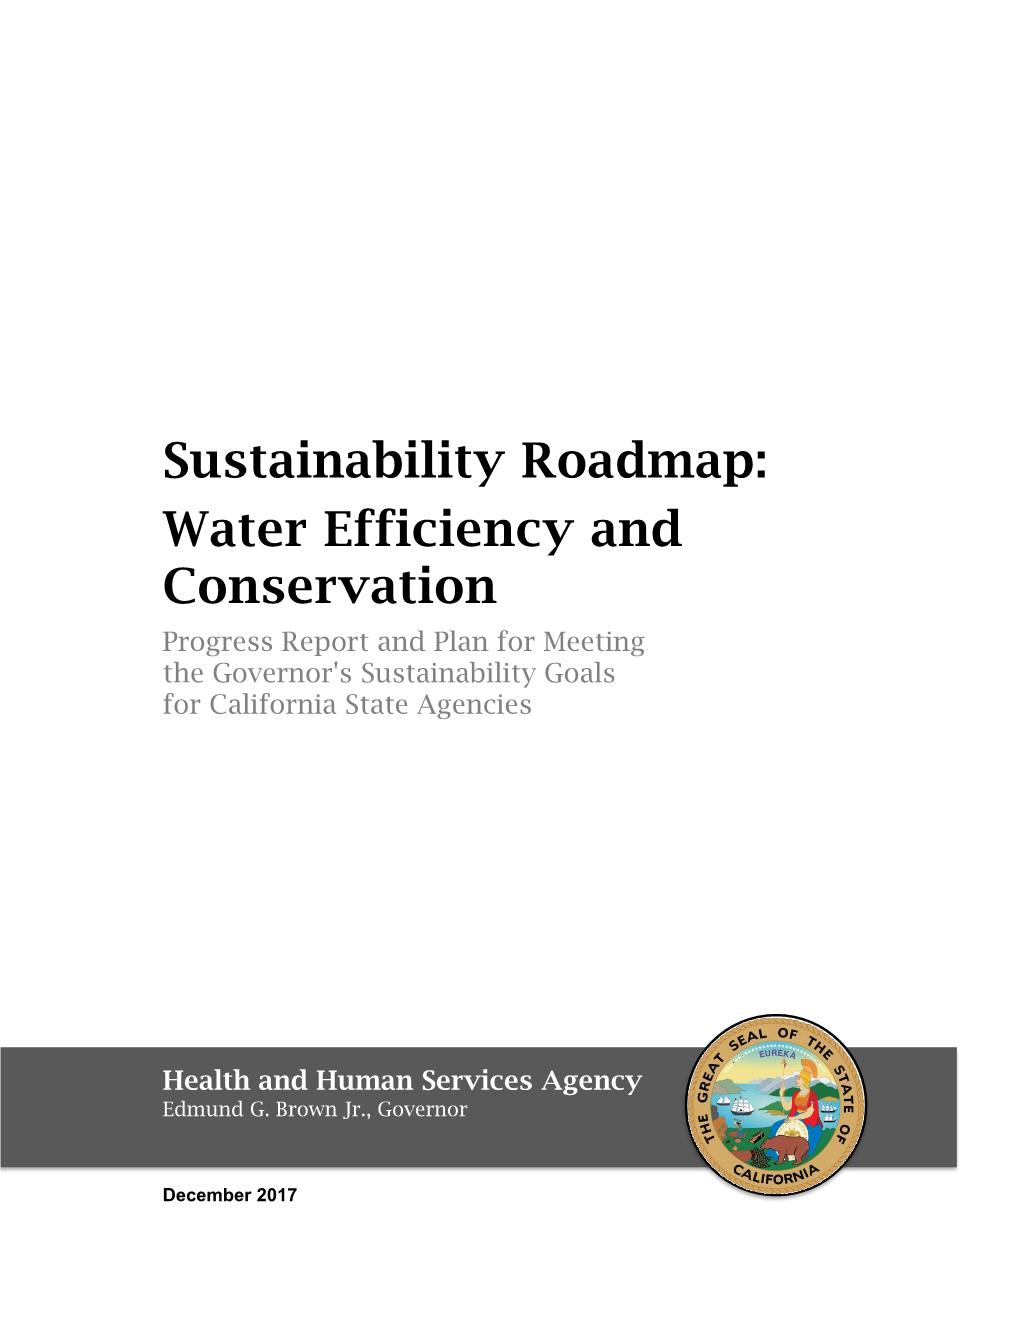 Sustainability Roadmap: Water Efficiency and Conservation